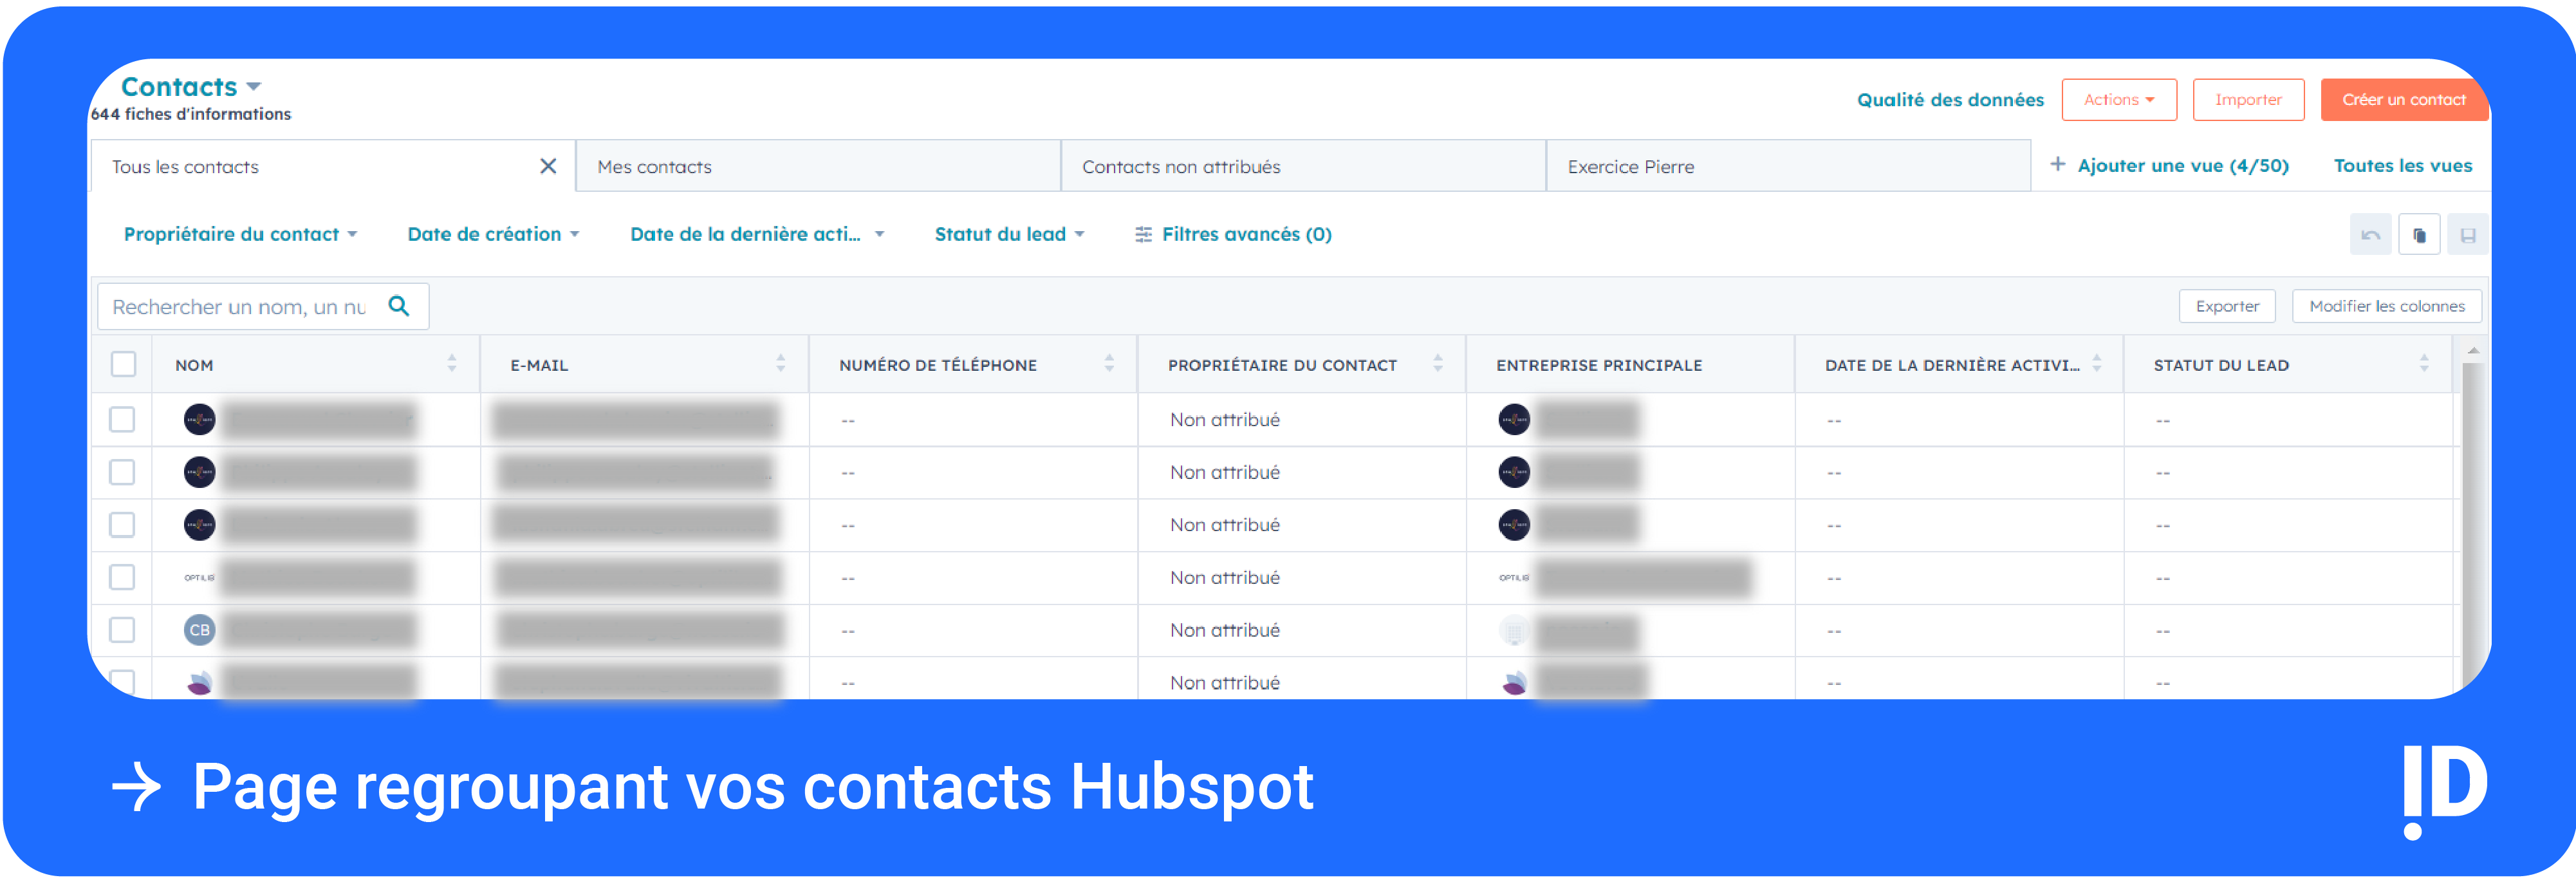 Page regroupant vos contacts Hubspot